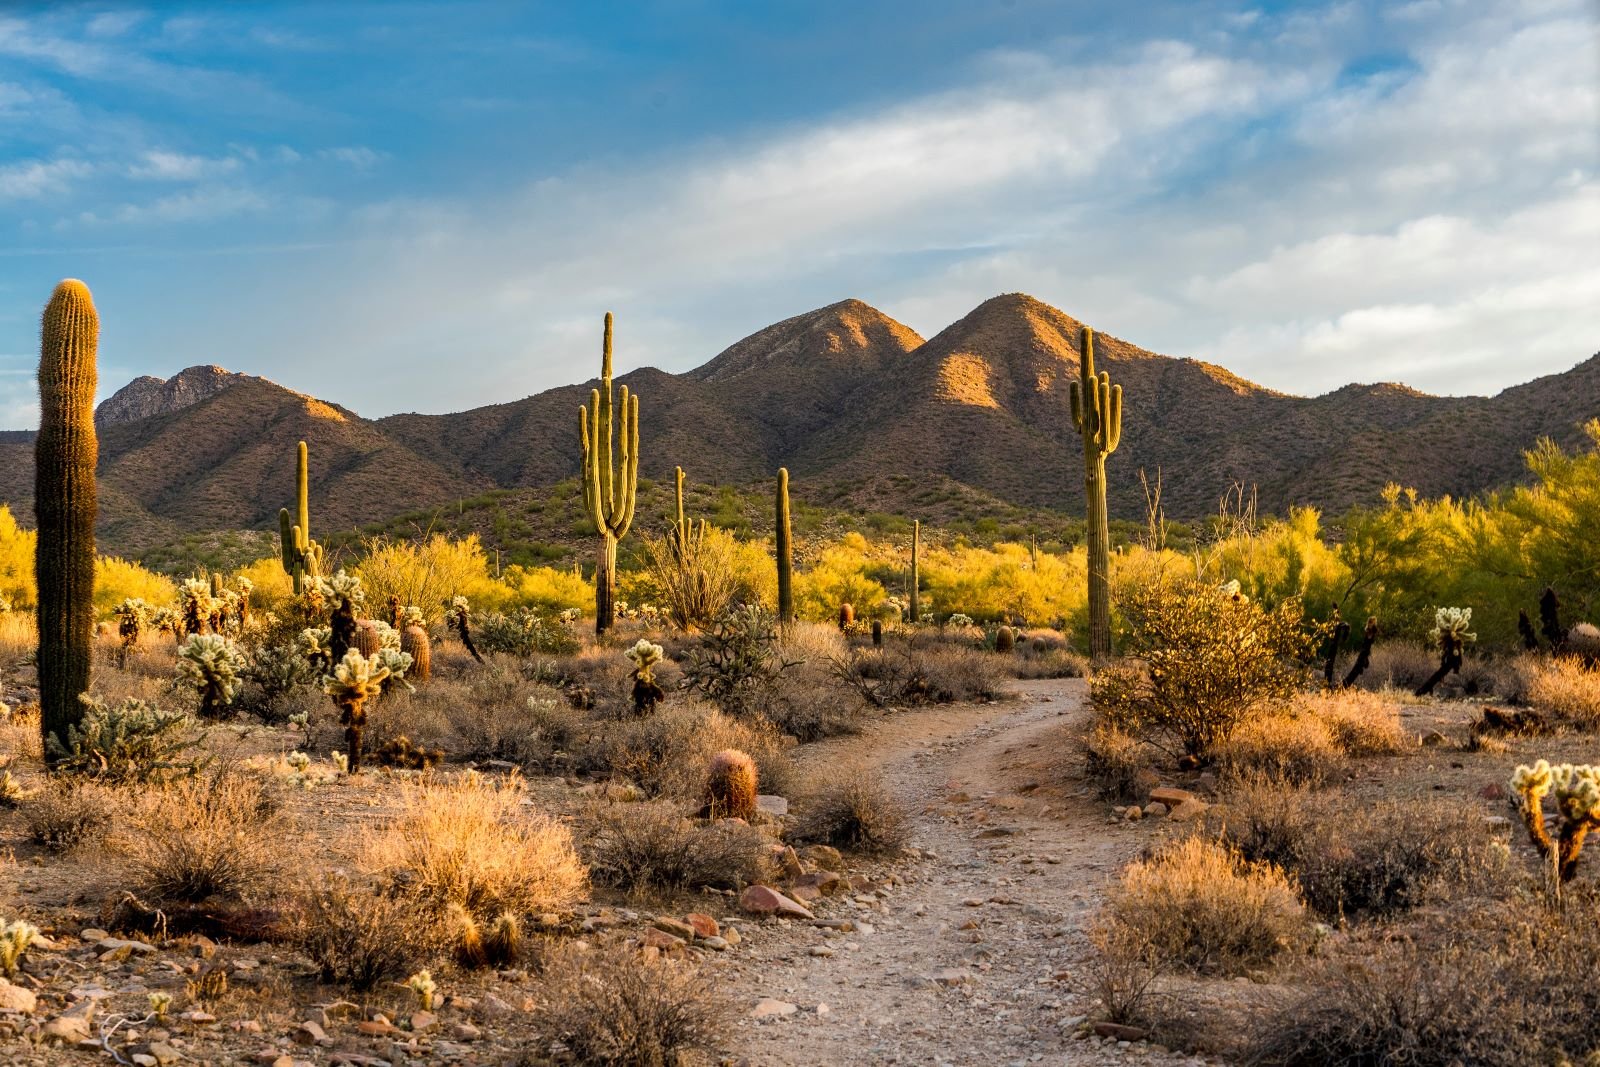 <p><span>Scottsdale is one of the best places for retired folks. It has a</span><a href="https://www.point2homes.com/US/Neighborhood/AZ/Scottsdale-Demographics.html#:~:text=There%20are%20238%2C685%20residents%20in%20Scottsdale%2C%20with,48.92%%20are%20males%20and%2051.08%%20are%20females." rel="noopener"><span> median age of close to 50 years</span></a><span> and offers golfing spots, spas, and beautiful architecture to its citizens. It also has some brilliant restaurants that cater to every foodie. However, the city has extreme summers with temperatures crossing the 100°F mark. While the healthcare system can improve, the crime rate is lower than the national average, so that’s a plus. </span></p>